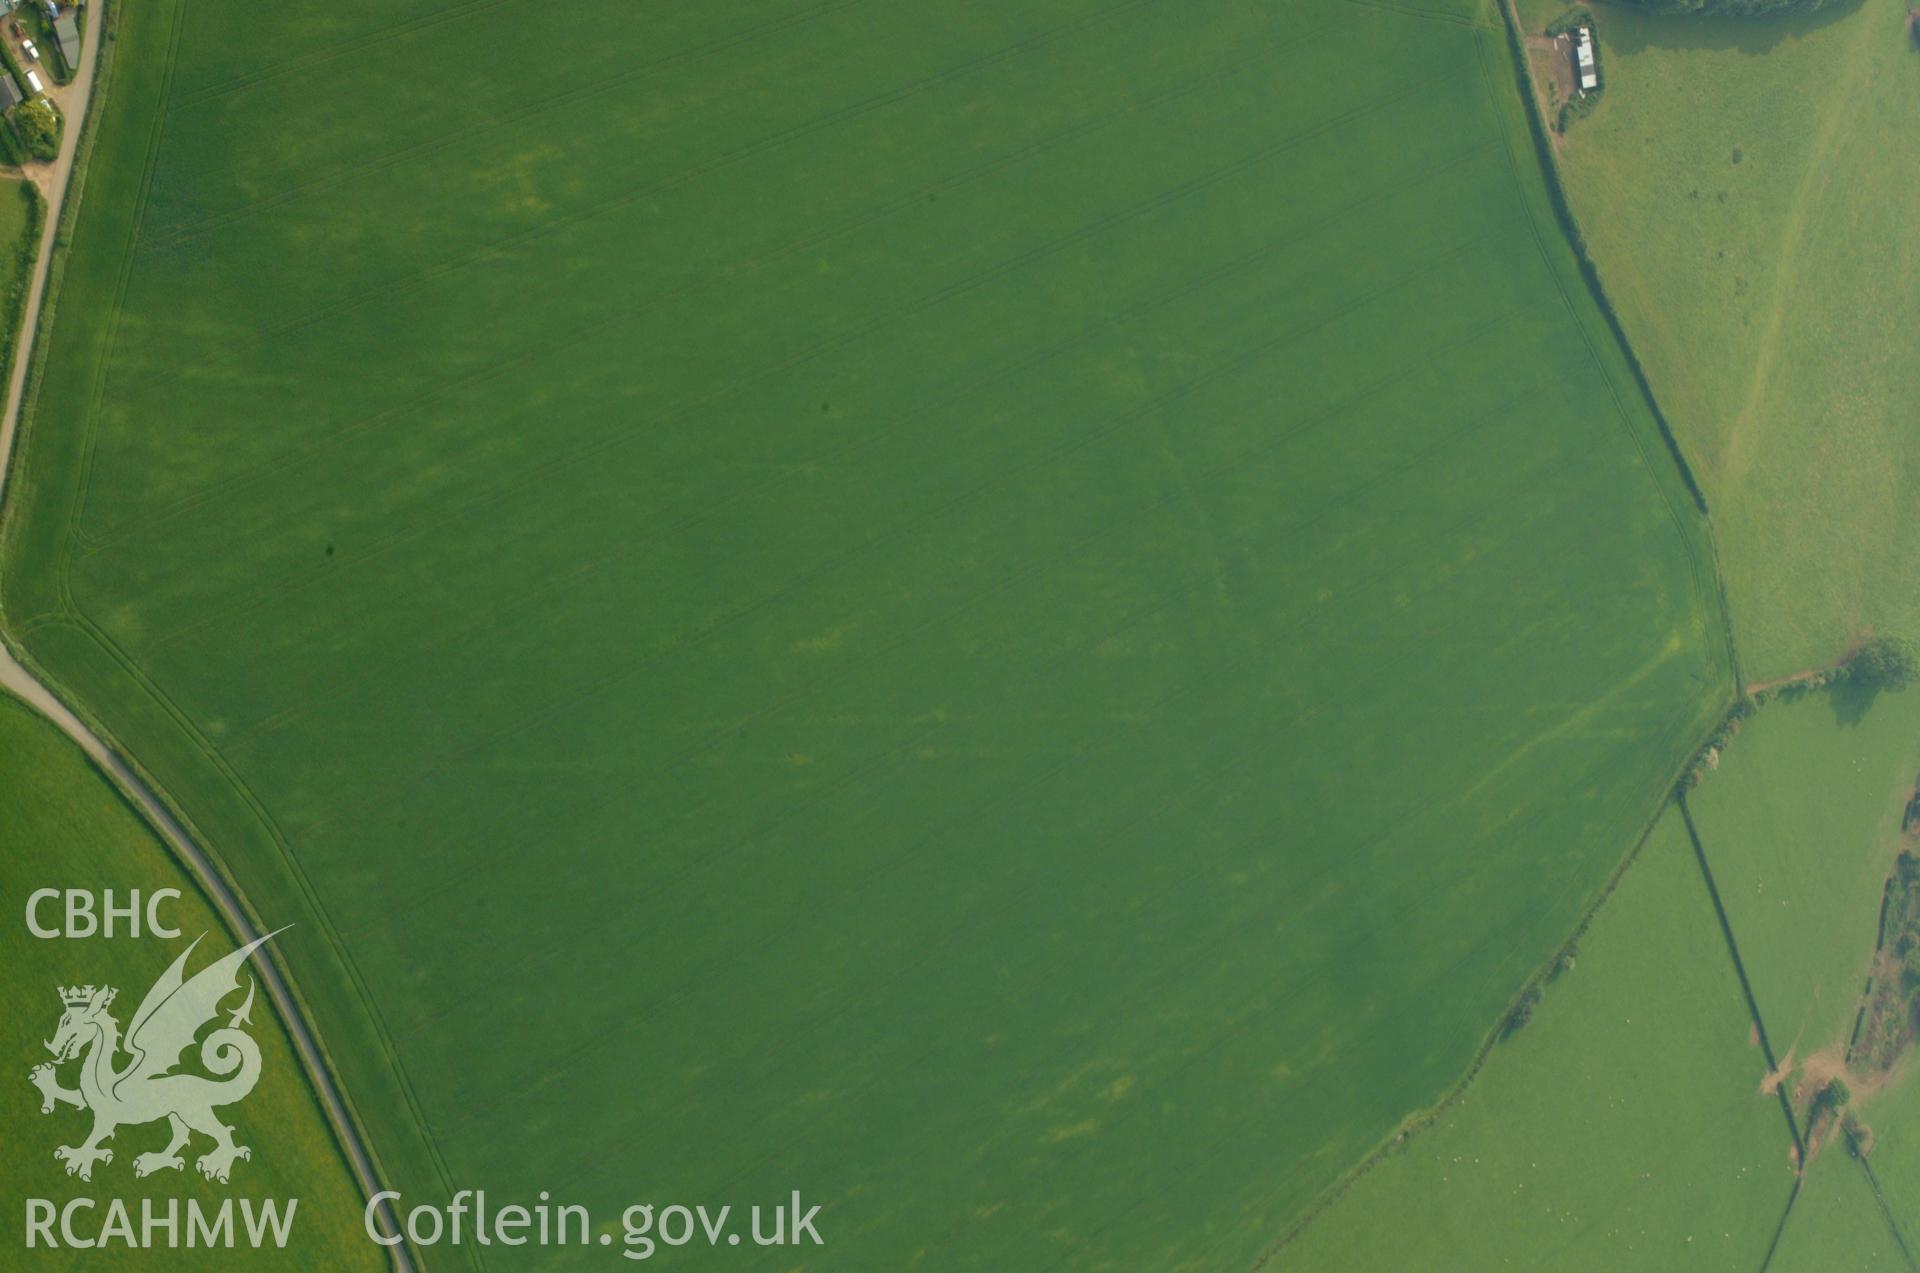 RCAHMW colour oblique aerial photograph of Trewen enclosure complex and ancient field system with cropmarks beginning to develop. Taken on 26 May 2004 by Toby Driver